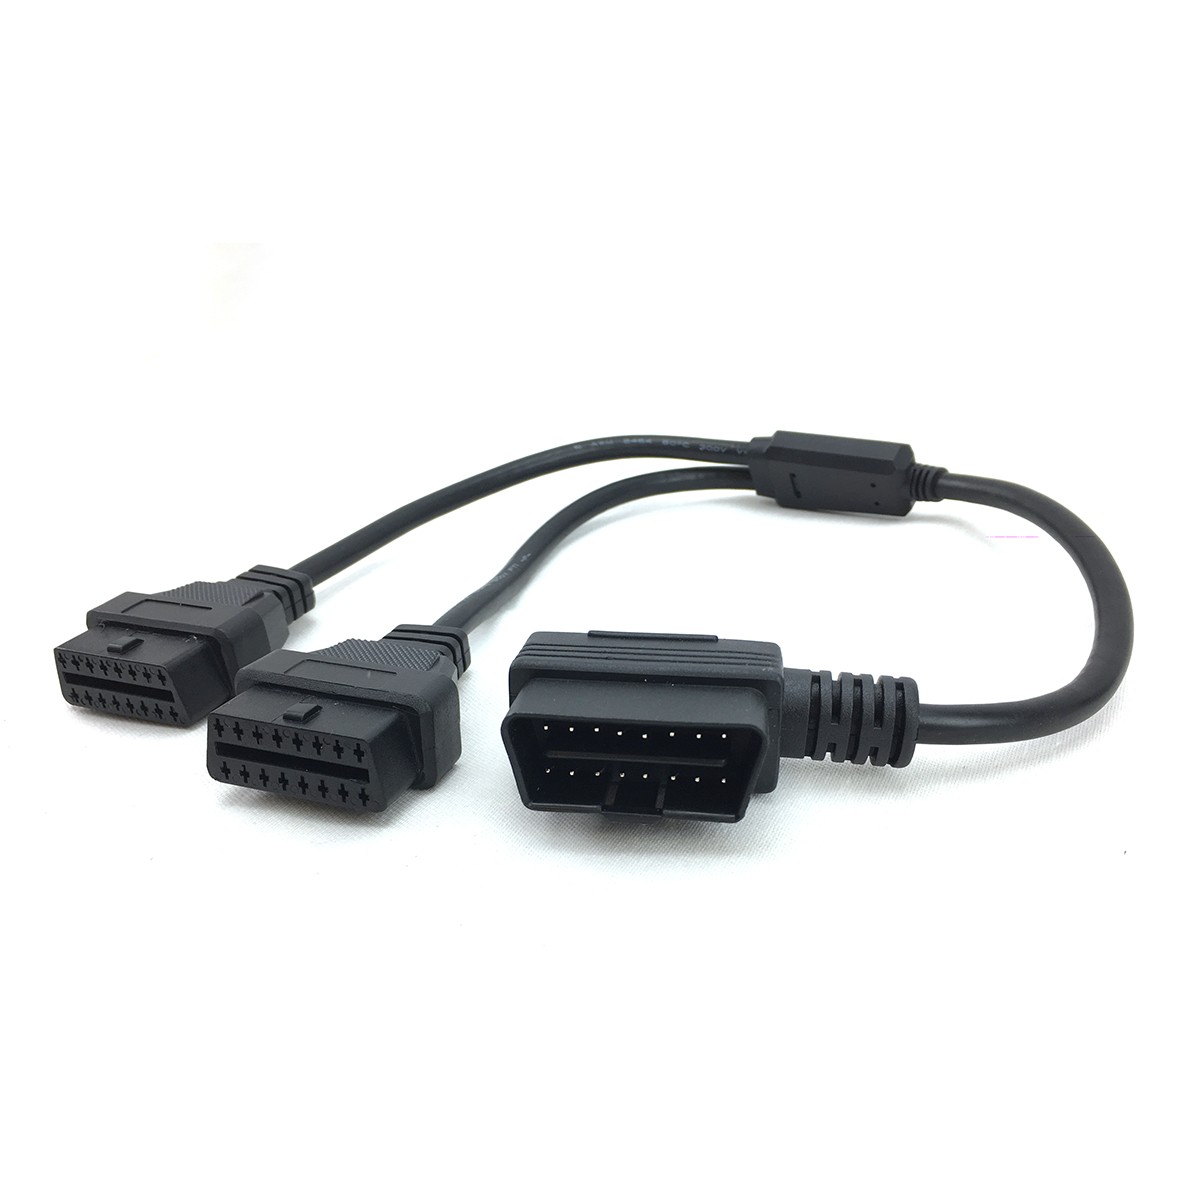 OBDII 2 divergence cable L type connector adoption sharing cable power supply take out OBD2 OBDII Crossfield